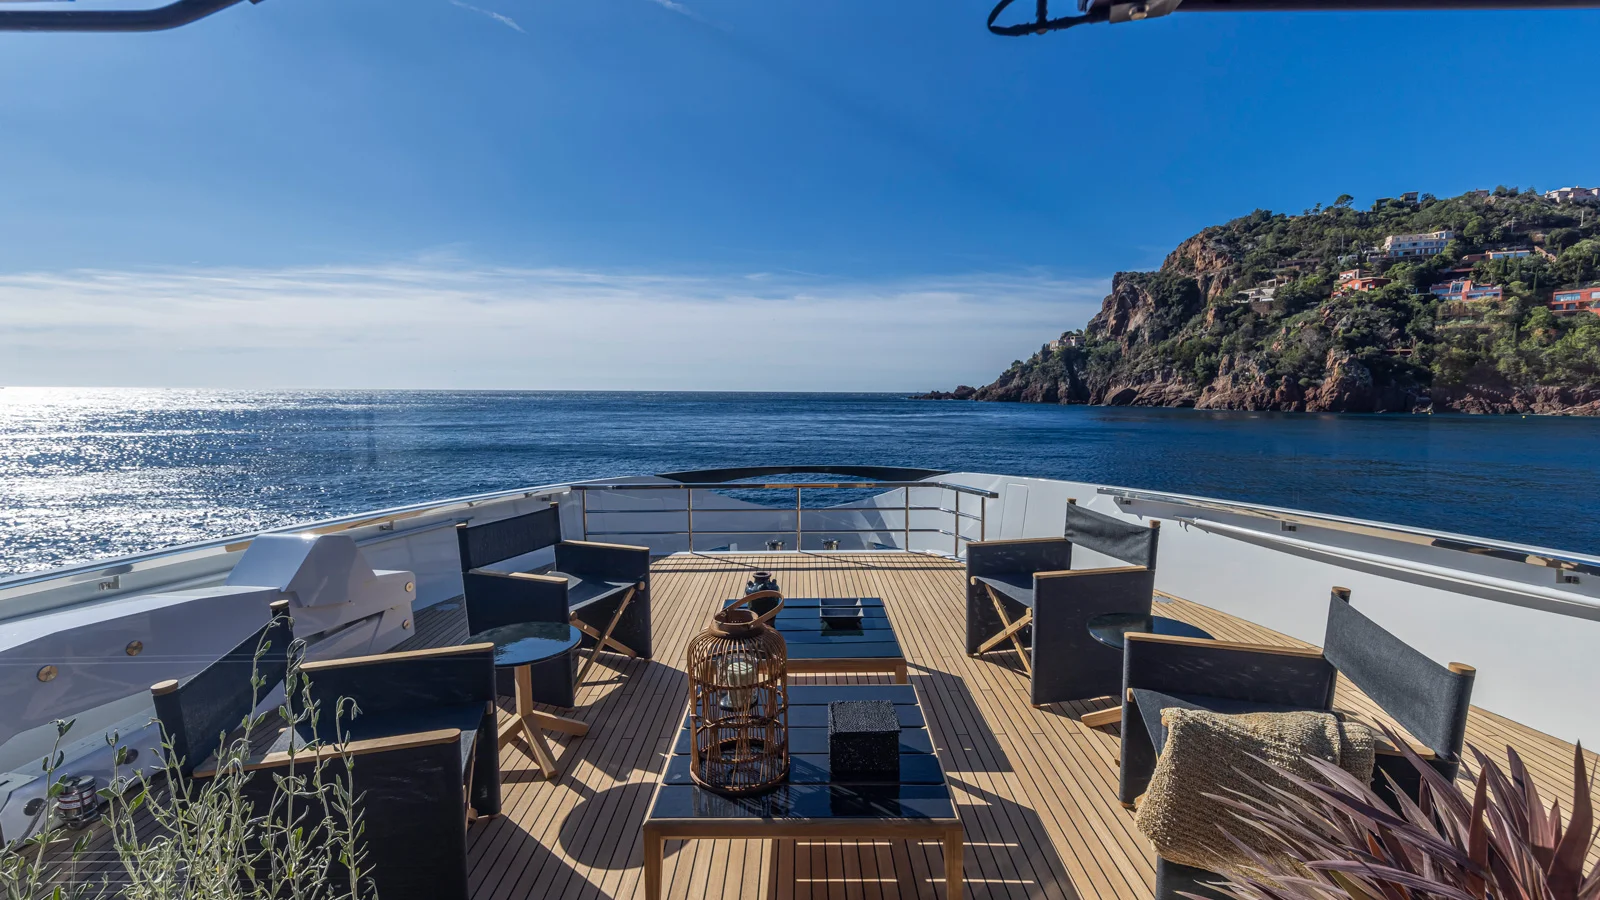 Lounge on the foredeck